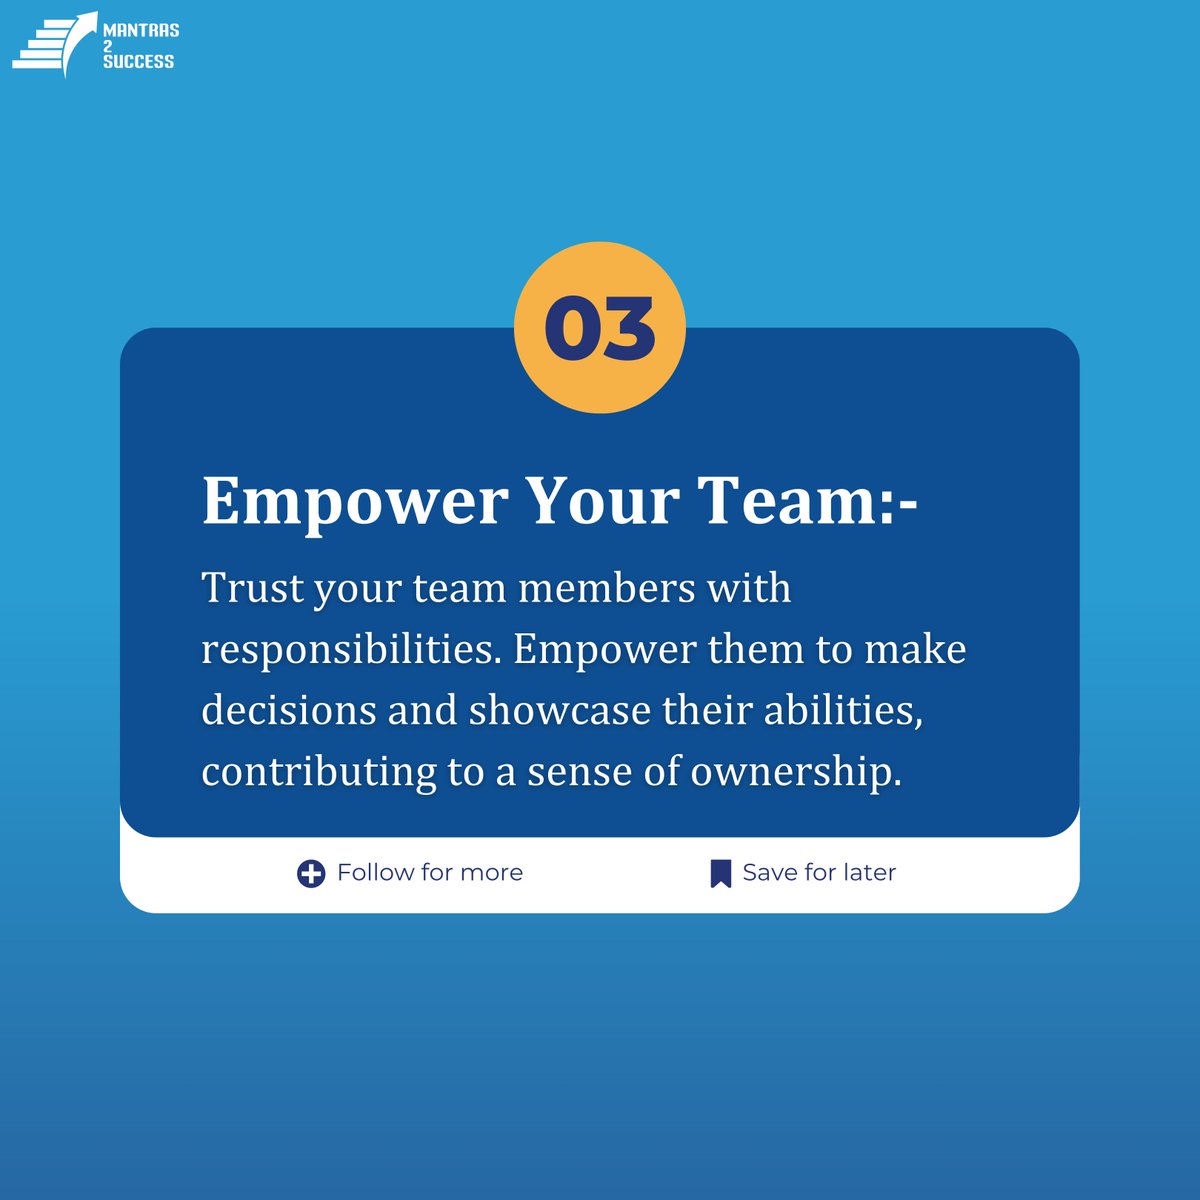 Part-1 
Trust takes time to develop through consistent actions and genuine efforts. By following these principles, you help create a workplace where trust forms the basis for success🤝✨ #mantras2success #Teamwork #TrustBuilding #WorkplaceSuccess #M2STips #jobs #hiring #followus